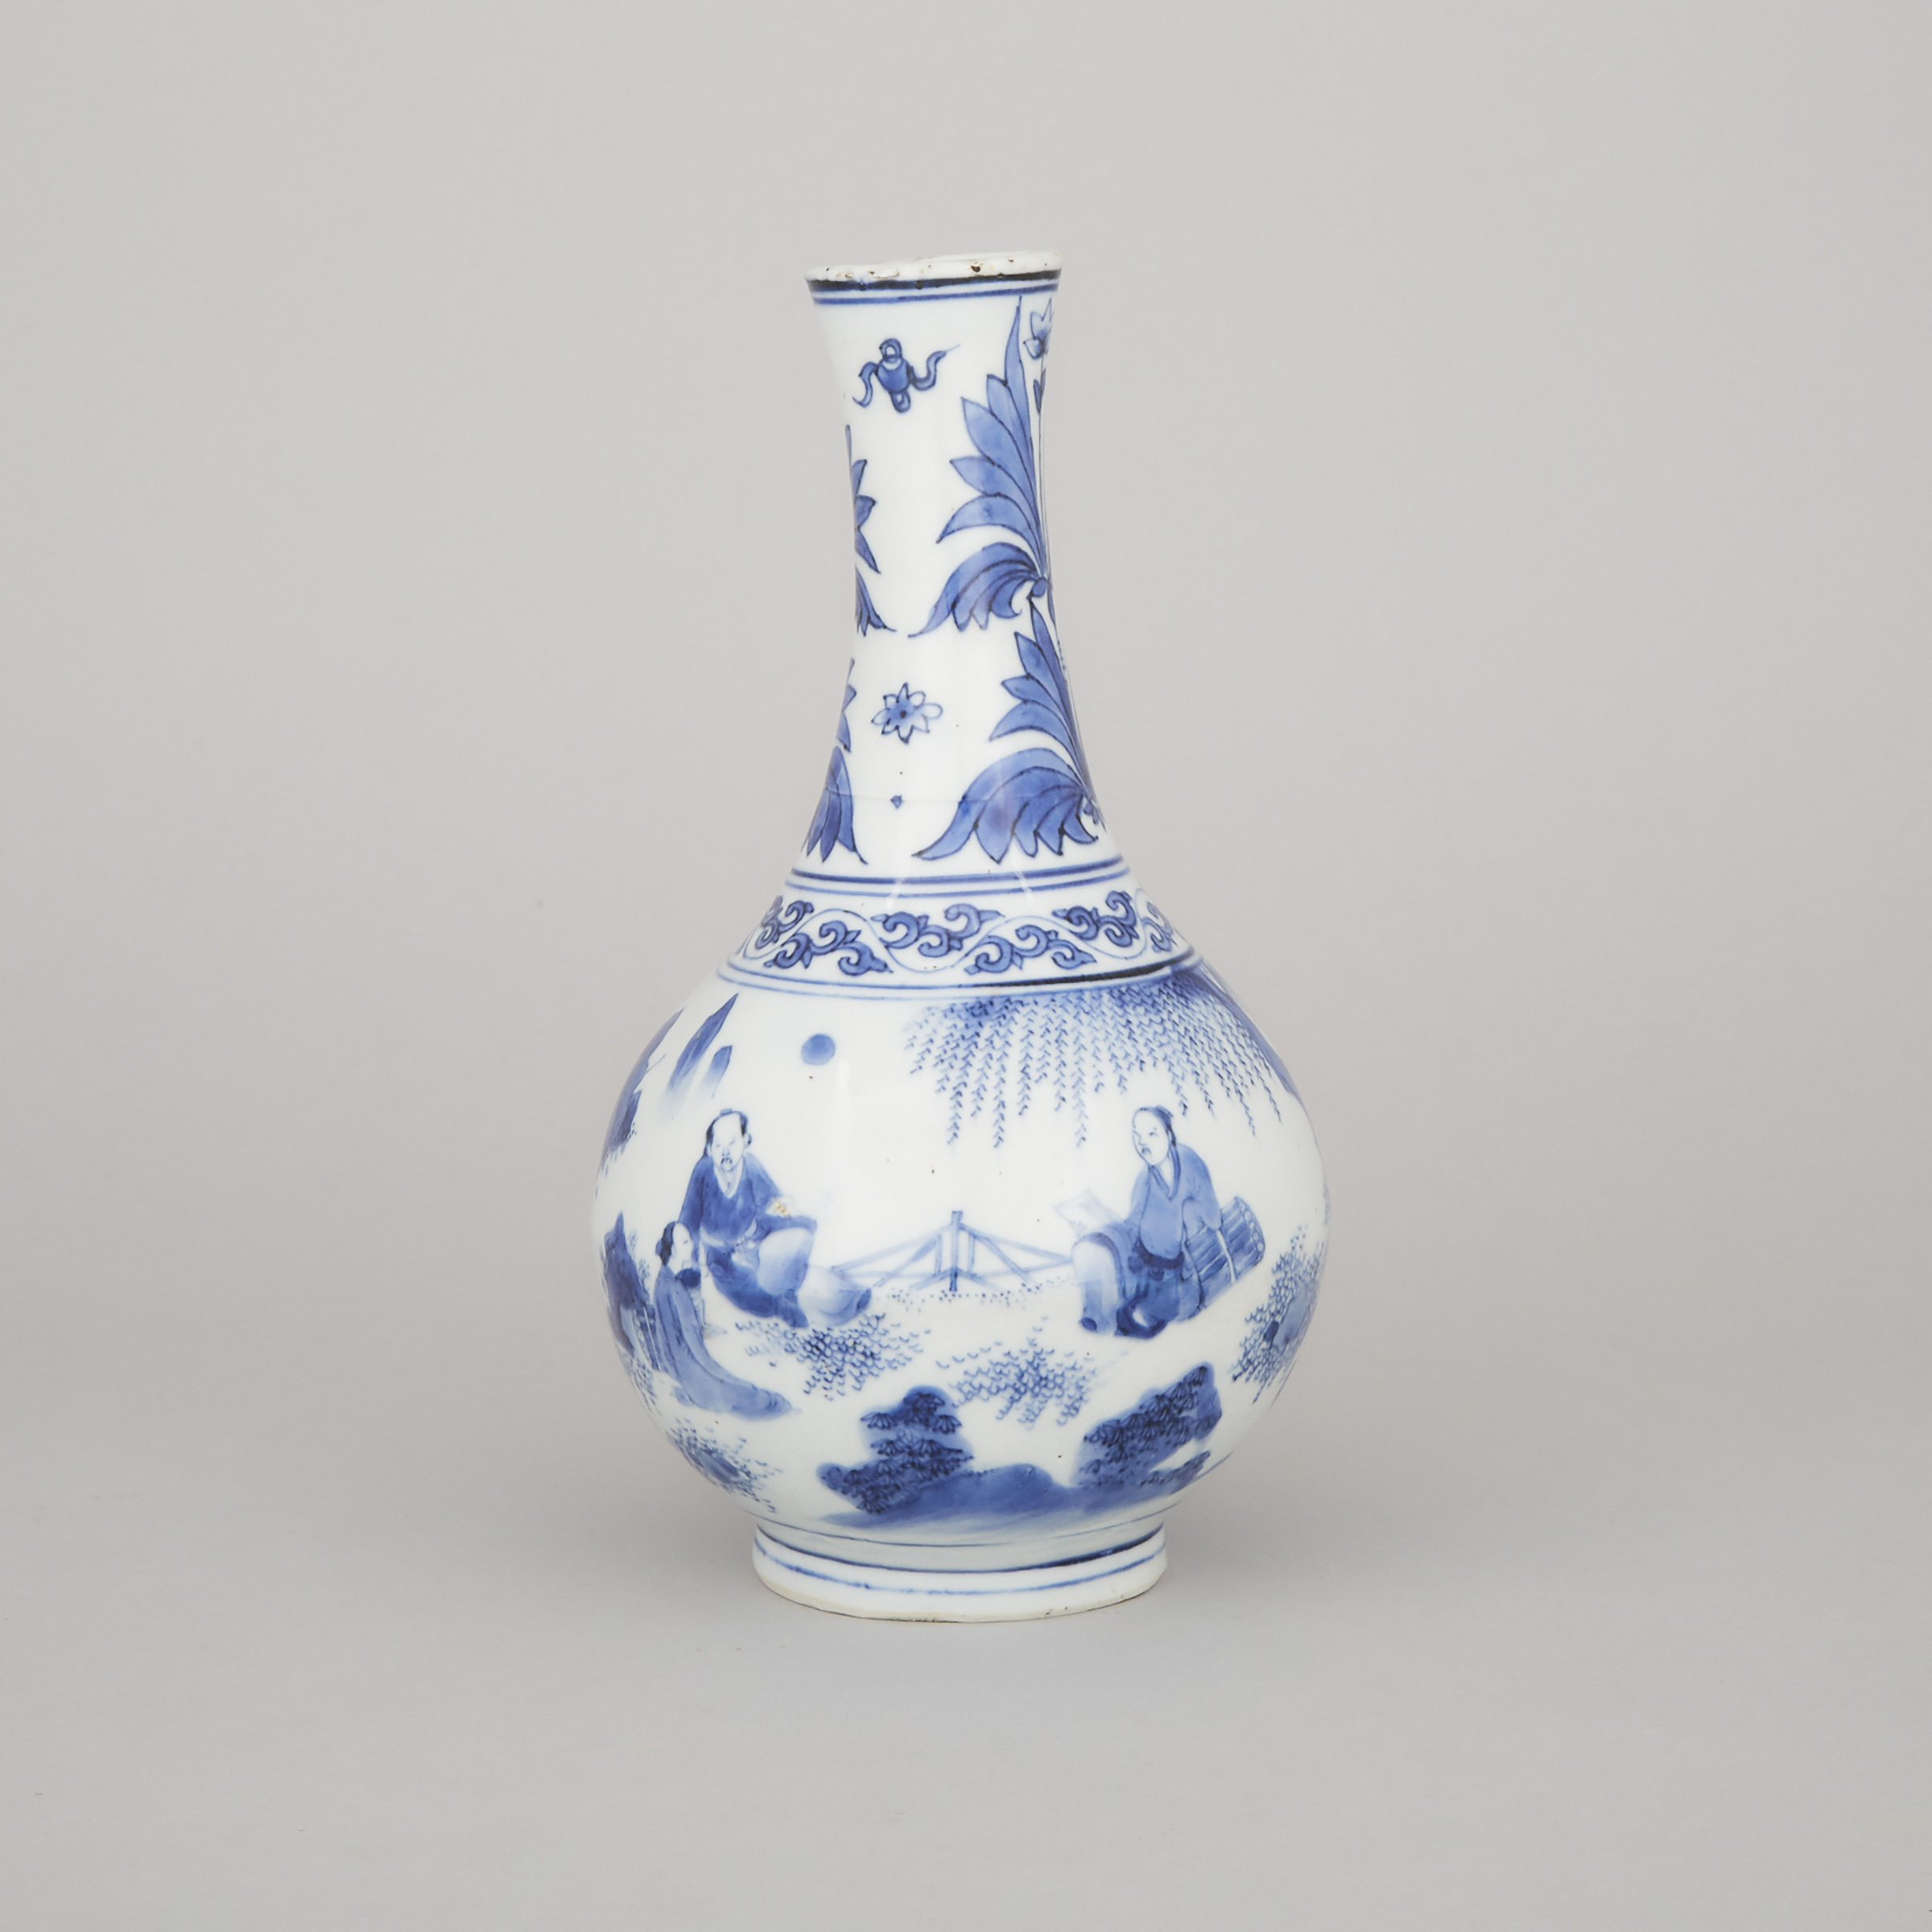 A Blue and White Bottle Vase, Transitional Period, Late Ming/Early Qing Dynasty